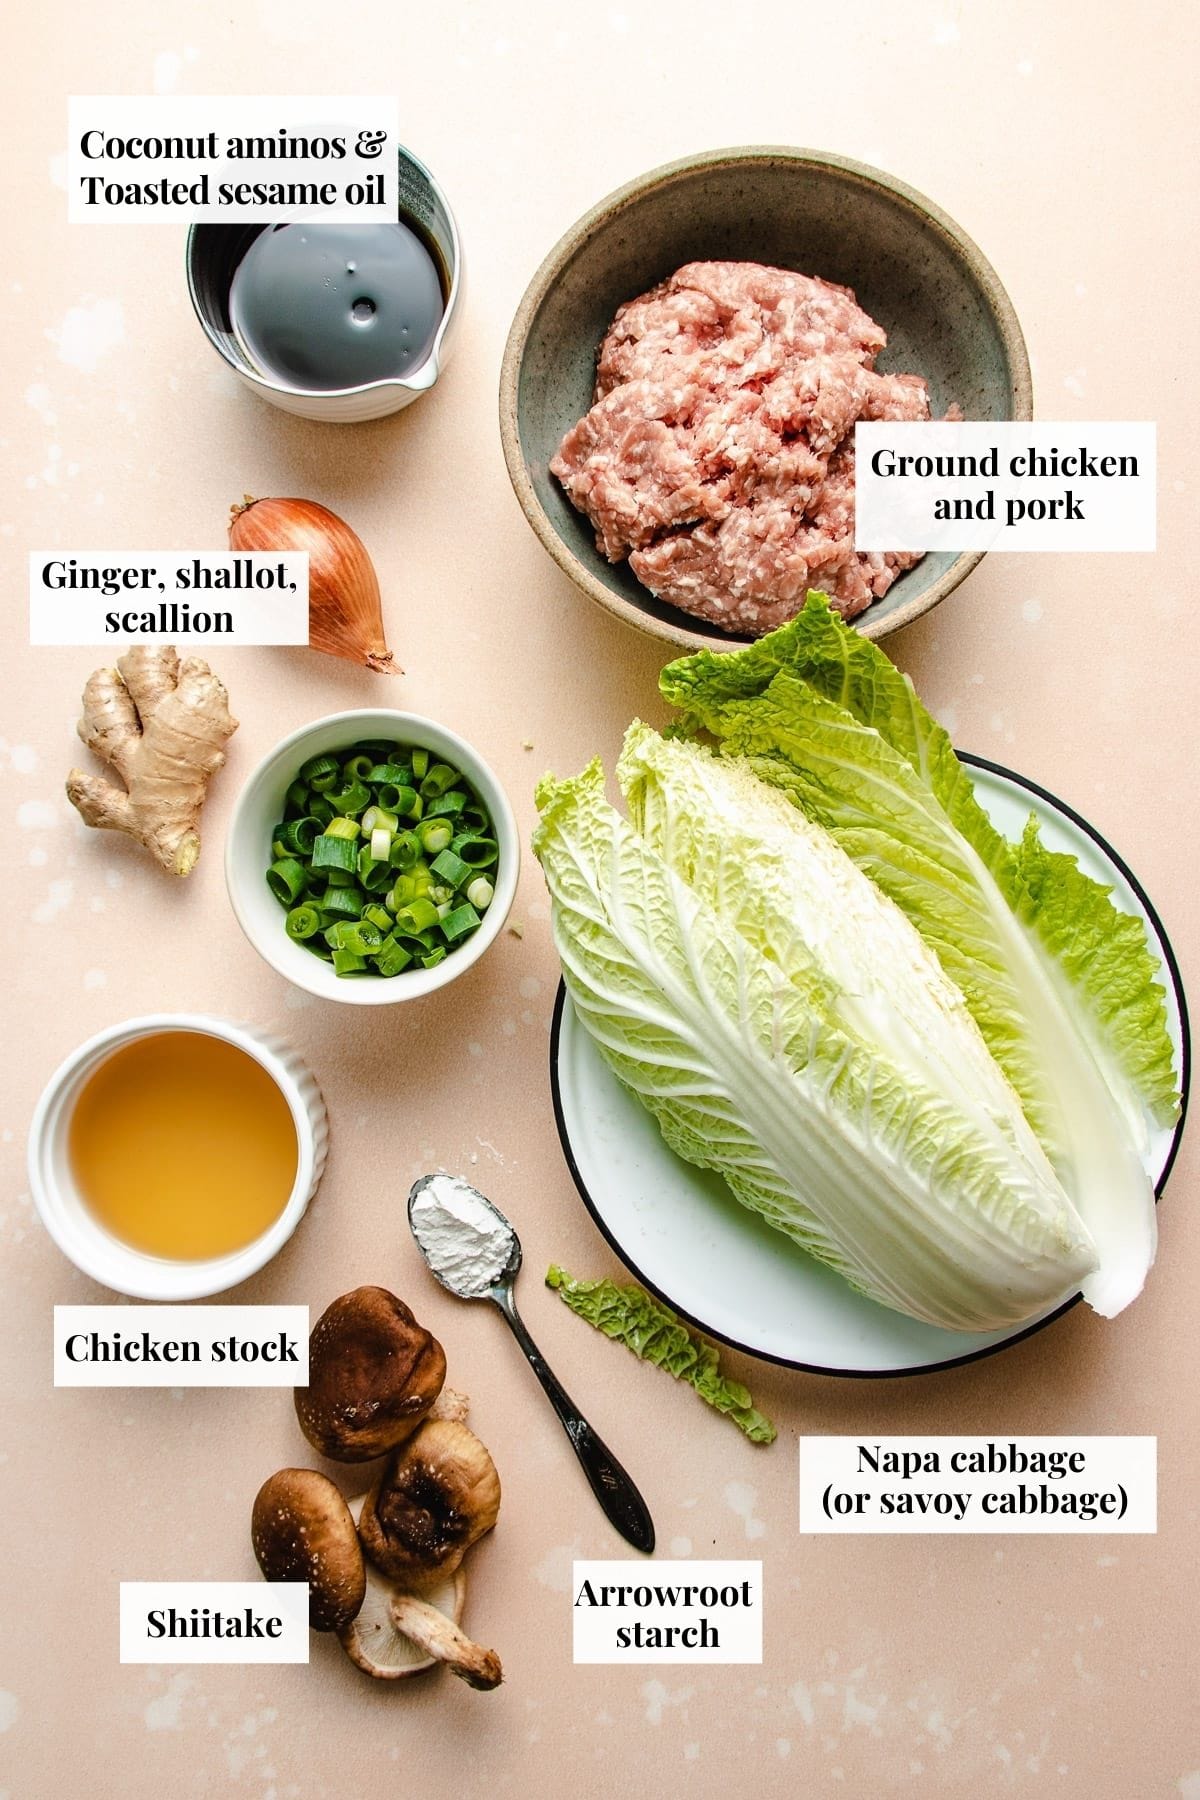 Photo shows ingredients needed to make the meatballs